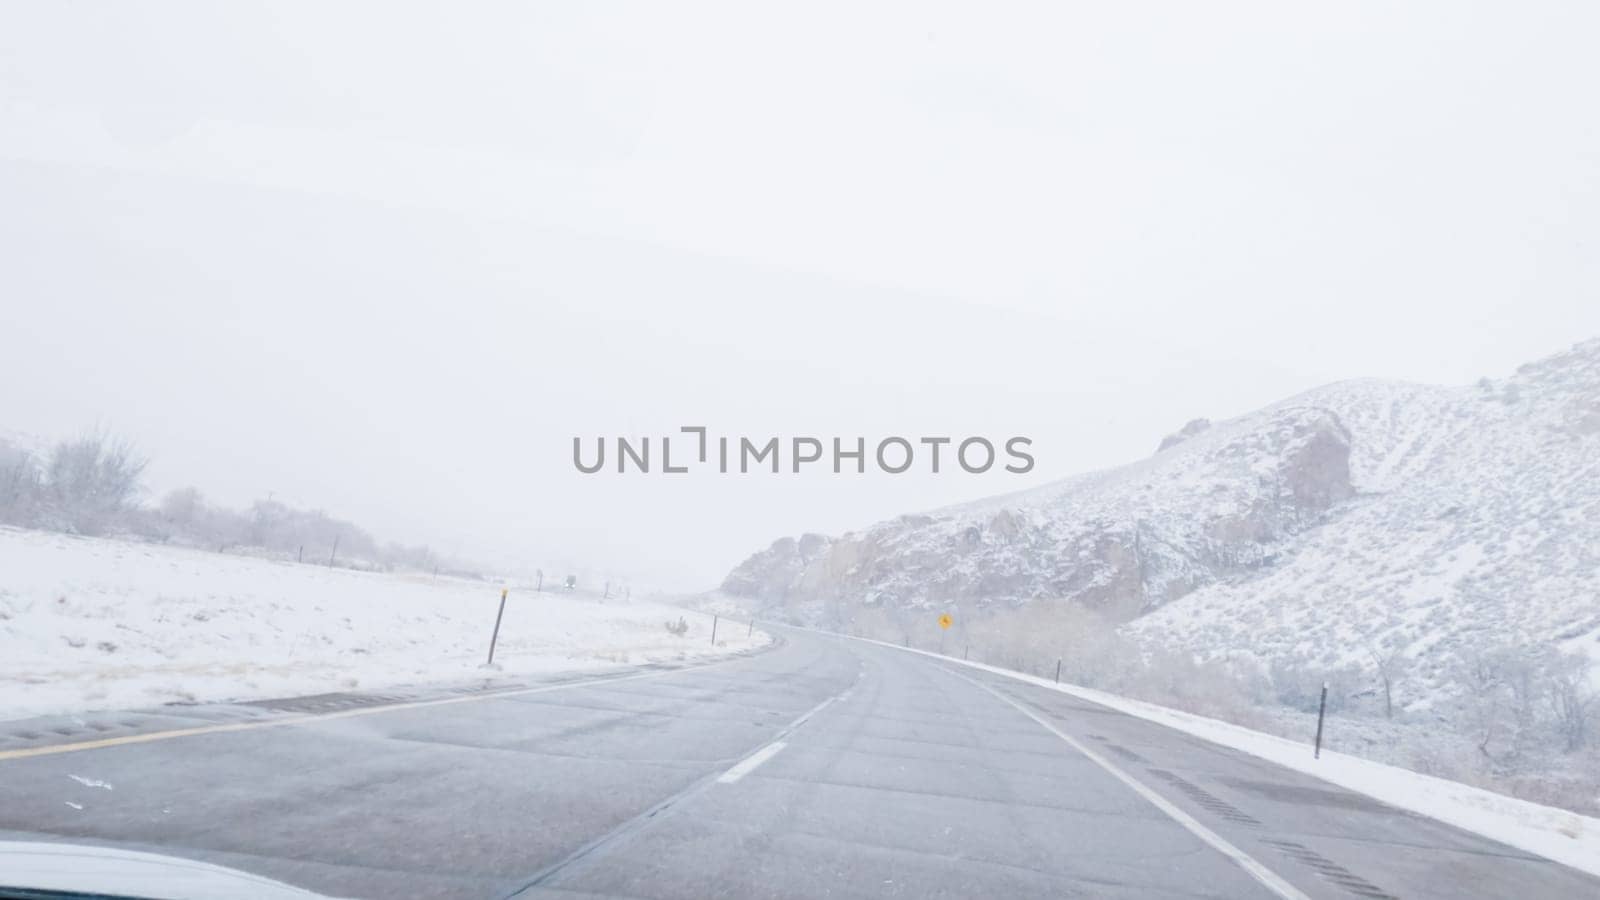 Braving a Winter Storm Driving Through Western Colorado by arinahabich